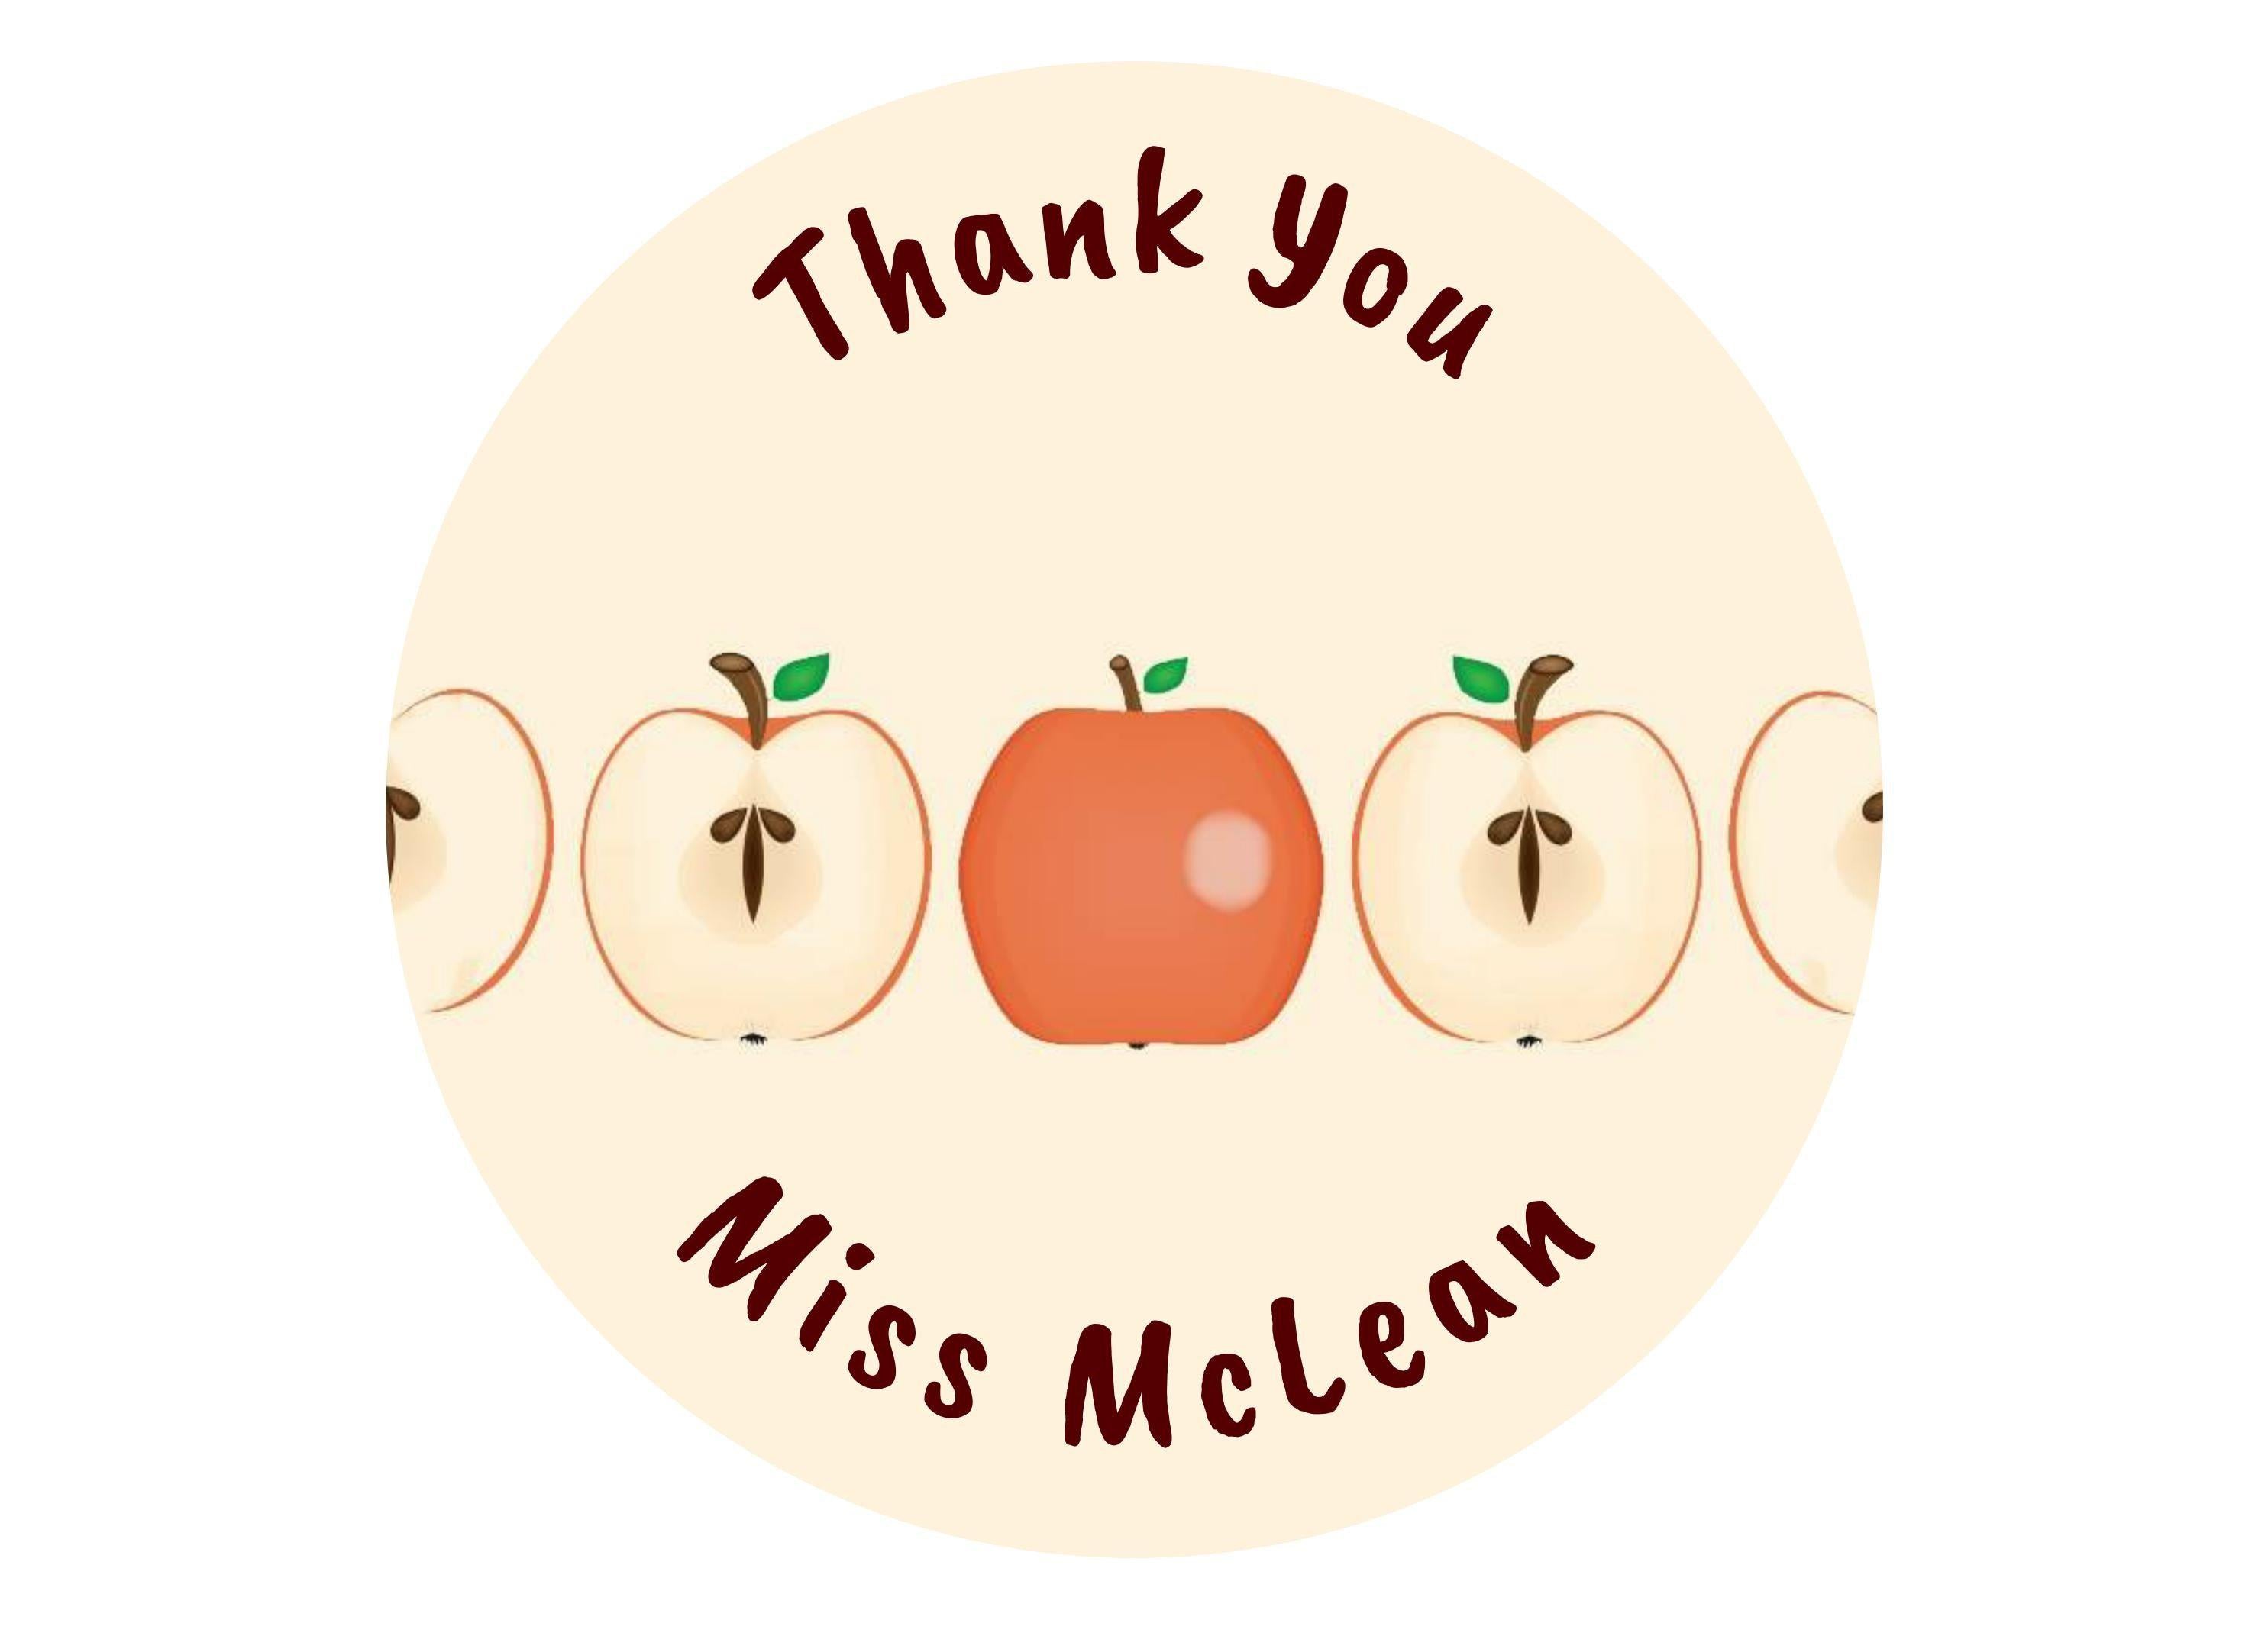 Personalised edible cake topper for your teacher